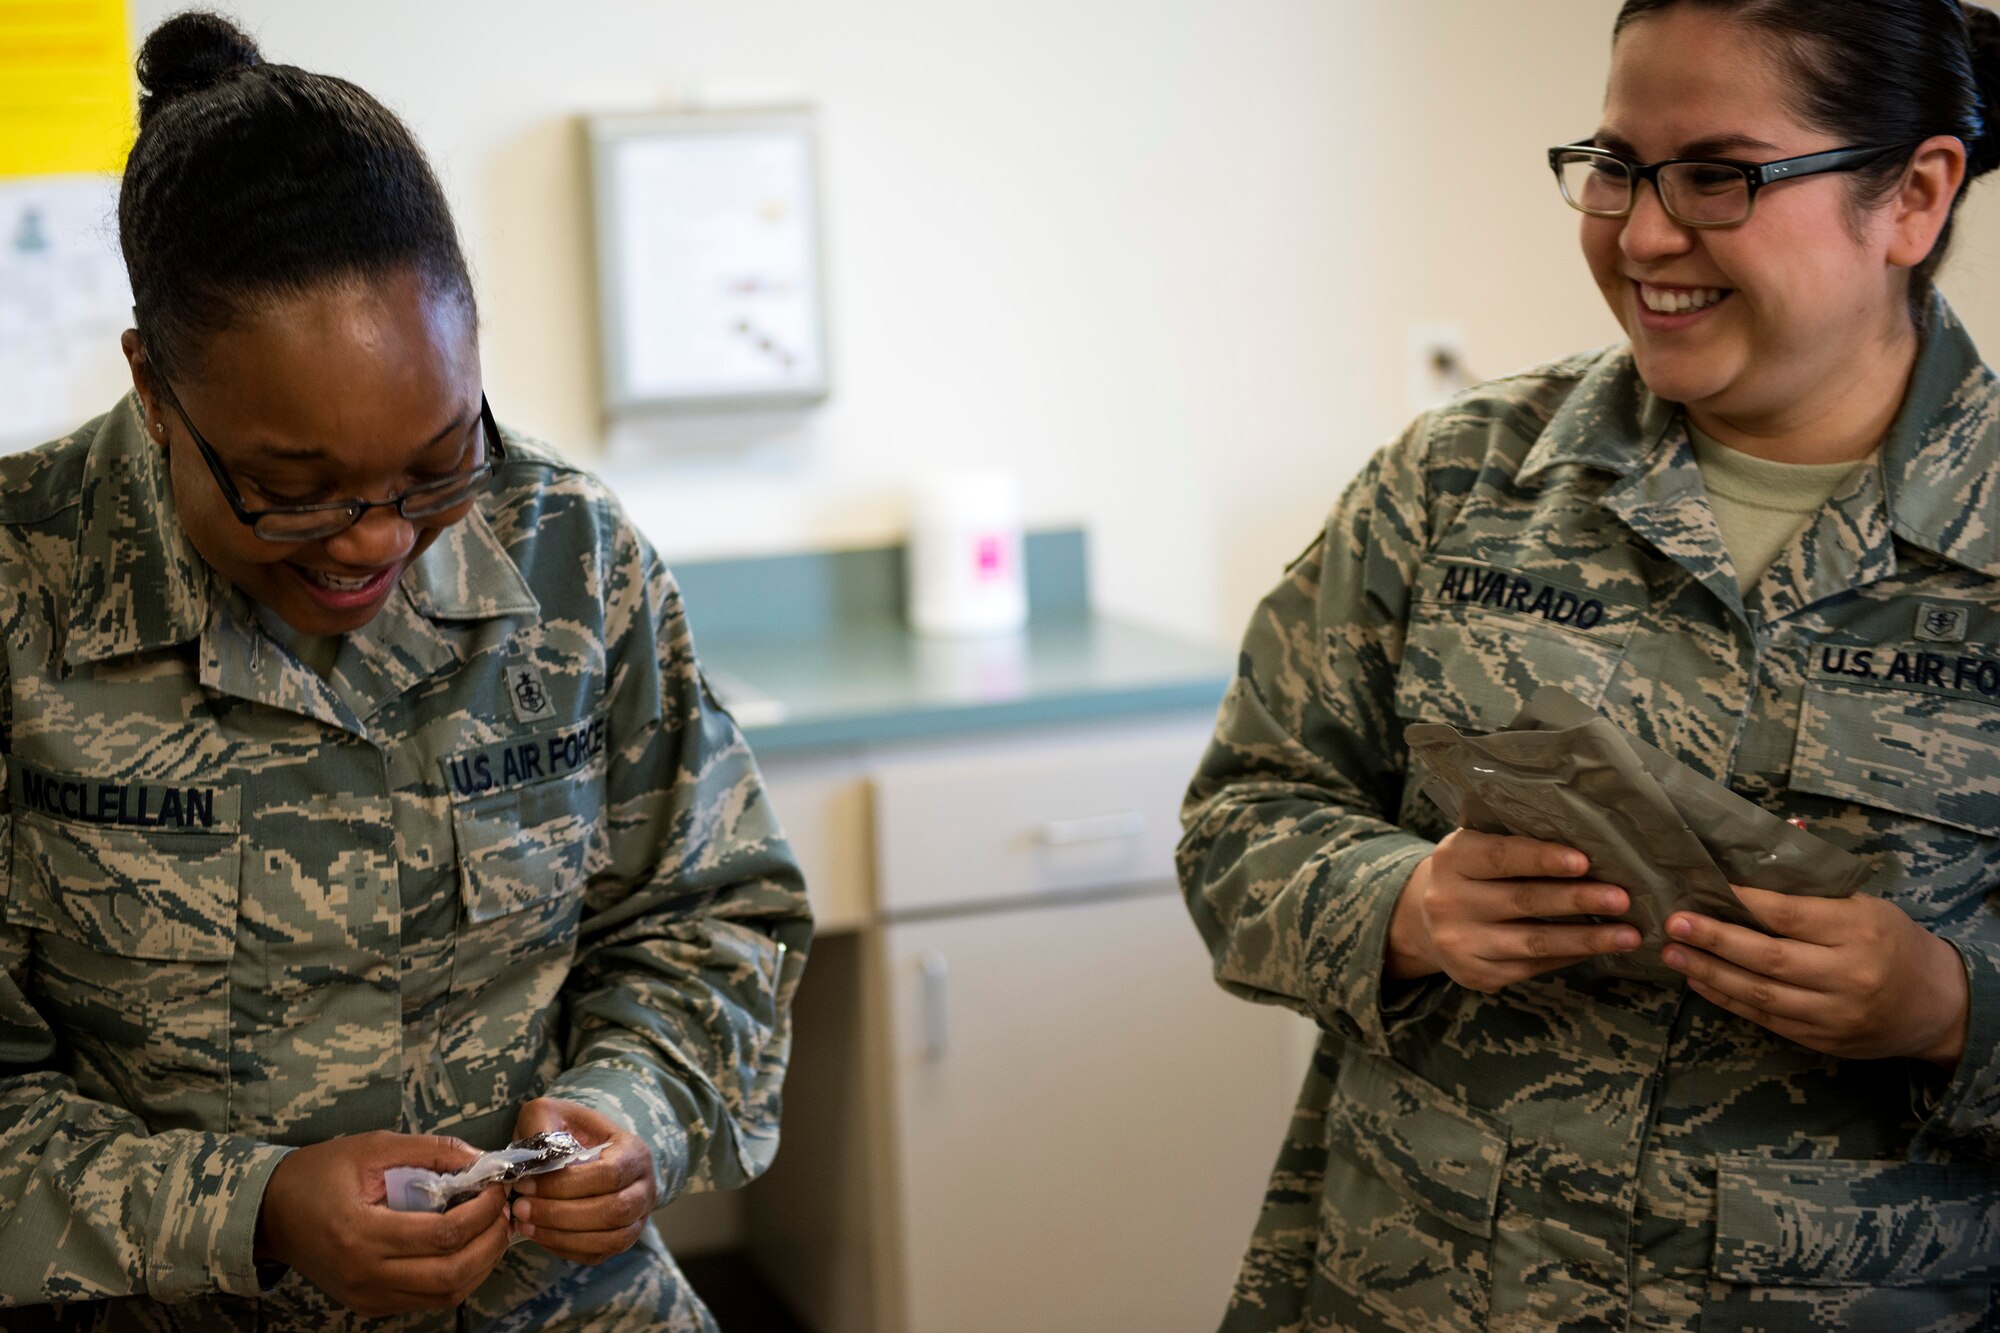 Staff Sgt. Jasmine McClellan, left, 23d Aerospace Medicine Squadron (AMDS) Public Health Flight NCO in charge of deployment medicine, and Senior Airman Evelyn Alvarado, 23d AMDS Public Health Flight meal, ready to eat (MRE) program manager, examine the content on their MREs during an MRE open-package inspection, April 6, 2018, at Moody Air Force Base, Ga. Airmen from Public Health examine the MREs for defects and overall quality and determine whether they’ll be utilized here, at other bases or to condemn the batch. Public Health monitors more than 8,400 MREs yearly to ensure they are safe and fit for consumption, so as to maintain a healthy fighting force. (U.S. Air Force photo by Airman 1st Class Erick Requadt)